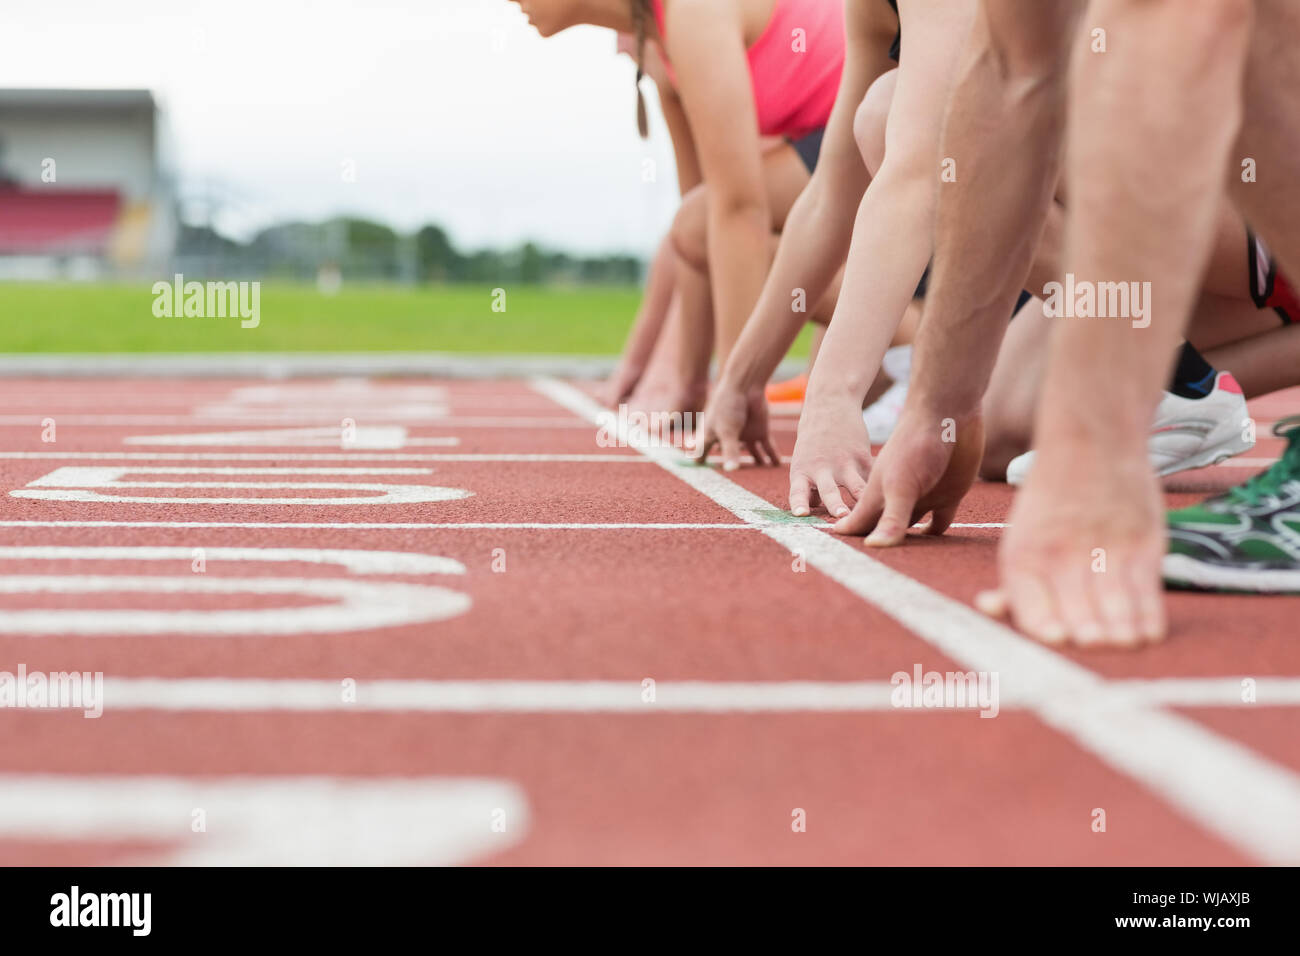 Side view of cropped people ready to race on track field Stock Photo